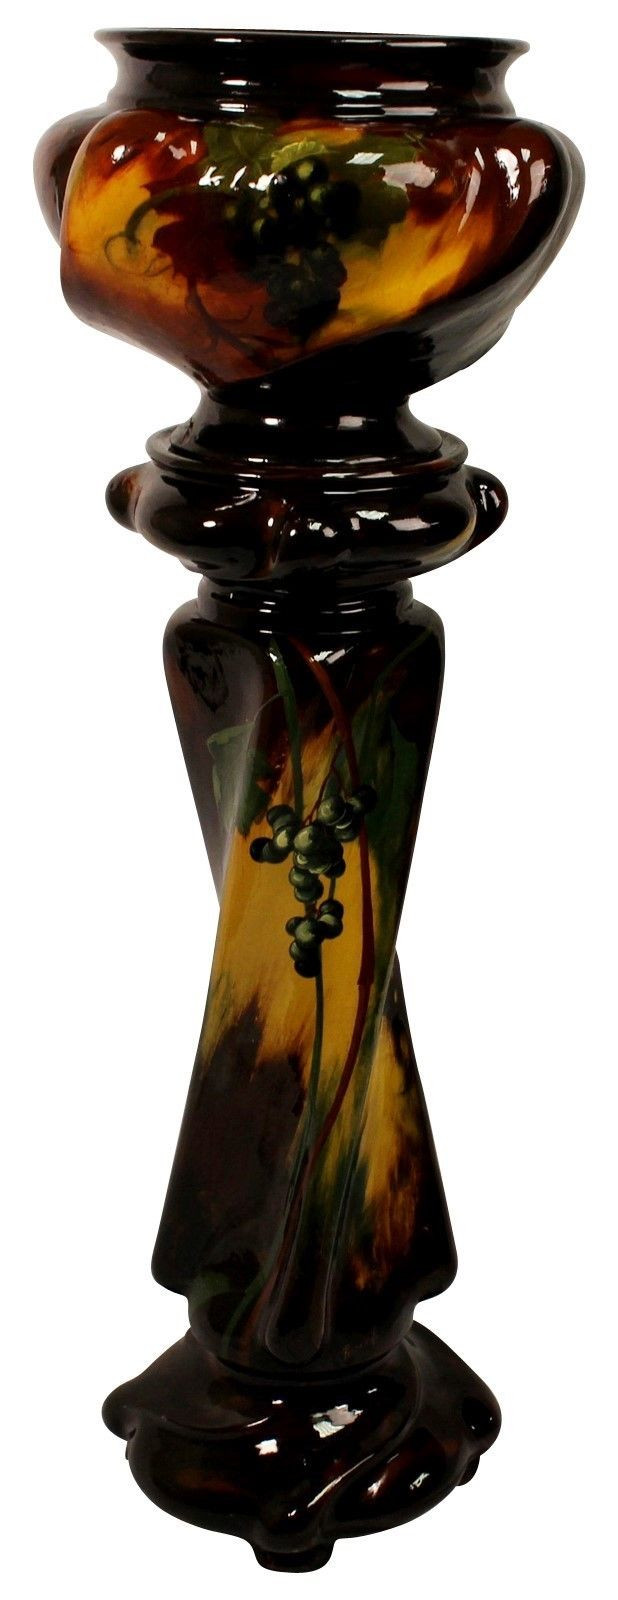 13 Amazing Louwelsa Weller Vase 2024 free download louwelsa weller vase of weller pottery aurelian tall grapes and vines jardiniere and throughout weller pottery aurelian tall grapes and vines jardiniere and pedestal ferrell